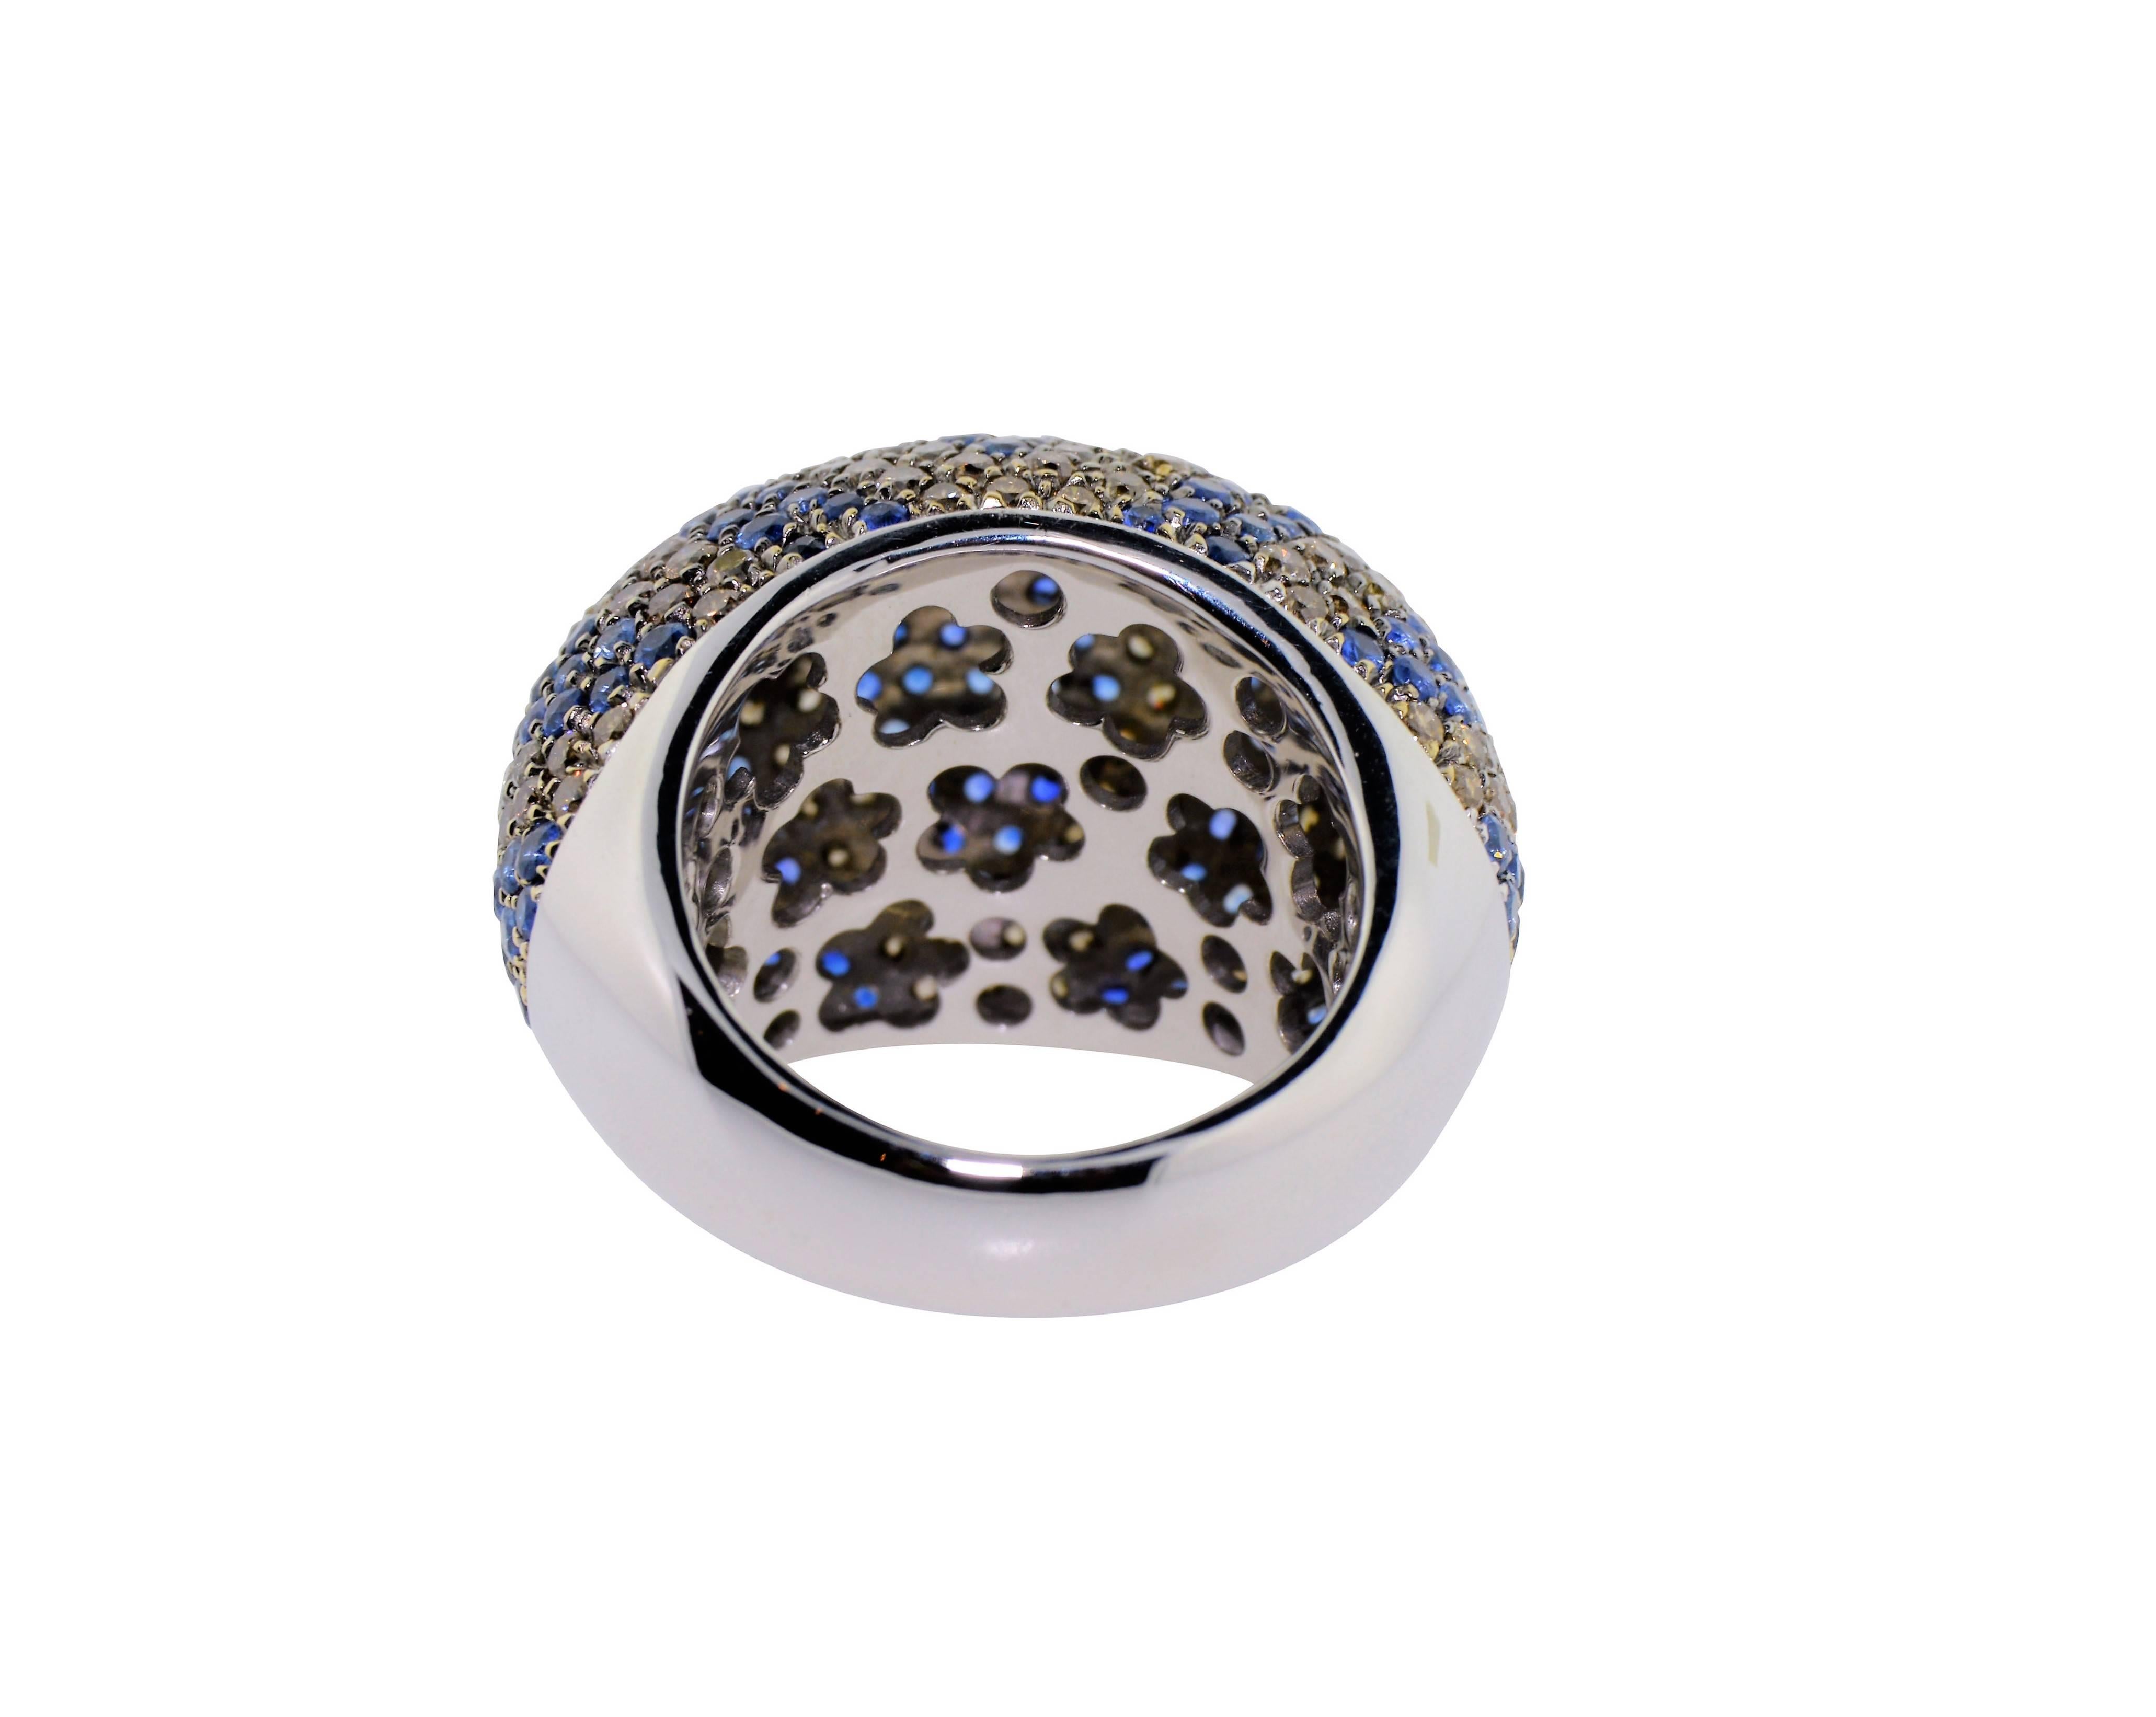 This big, bold, sparkling dome ring is a real show stopper! Expertly crafted in 18K White Gold, the entire top and side surfaces are covered with bright, fine color, natural blue sapphires and natural cognac color diamonds in a fun, unusual pattern.